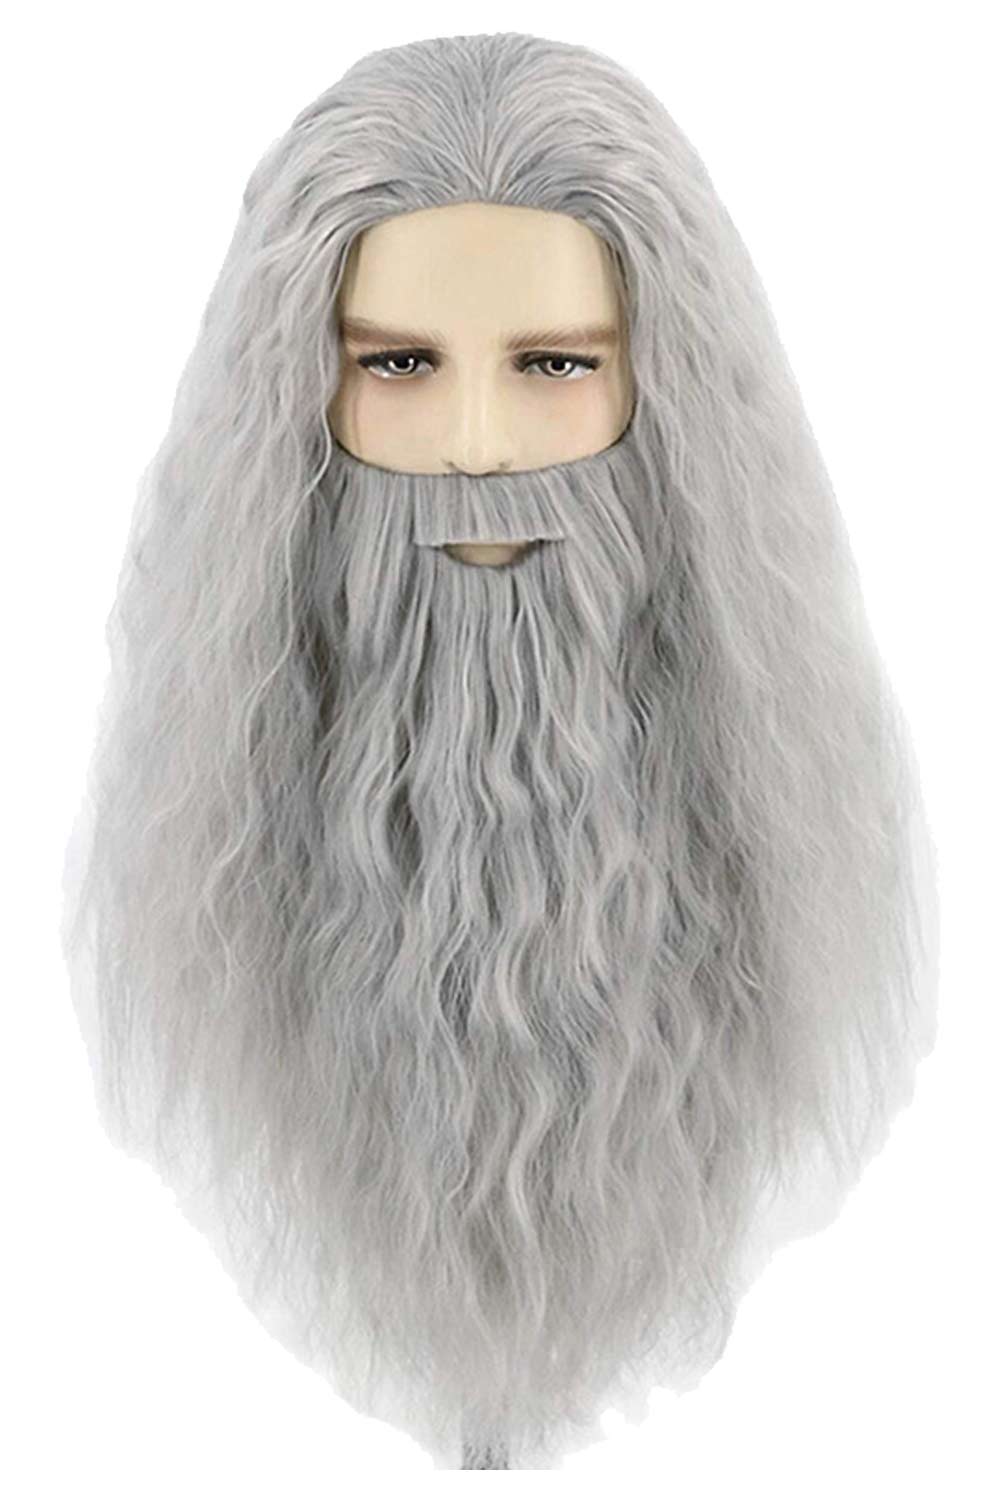 Hobbits Gandalf Dumbledore Elderly Wizard Cosplay Wig Heat Resistant Synthetic Hair and Beard Carnival Halloween Party Costume Accessories